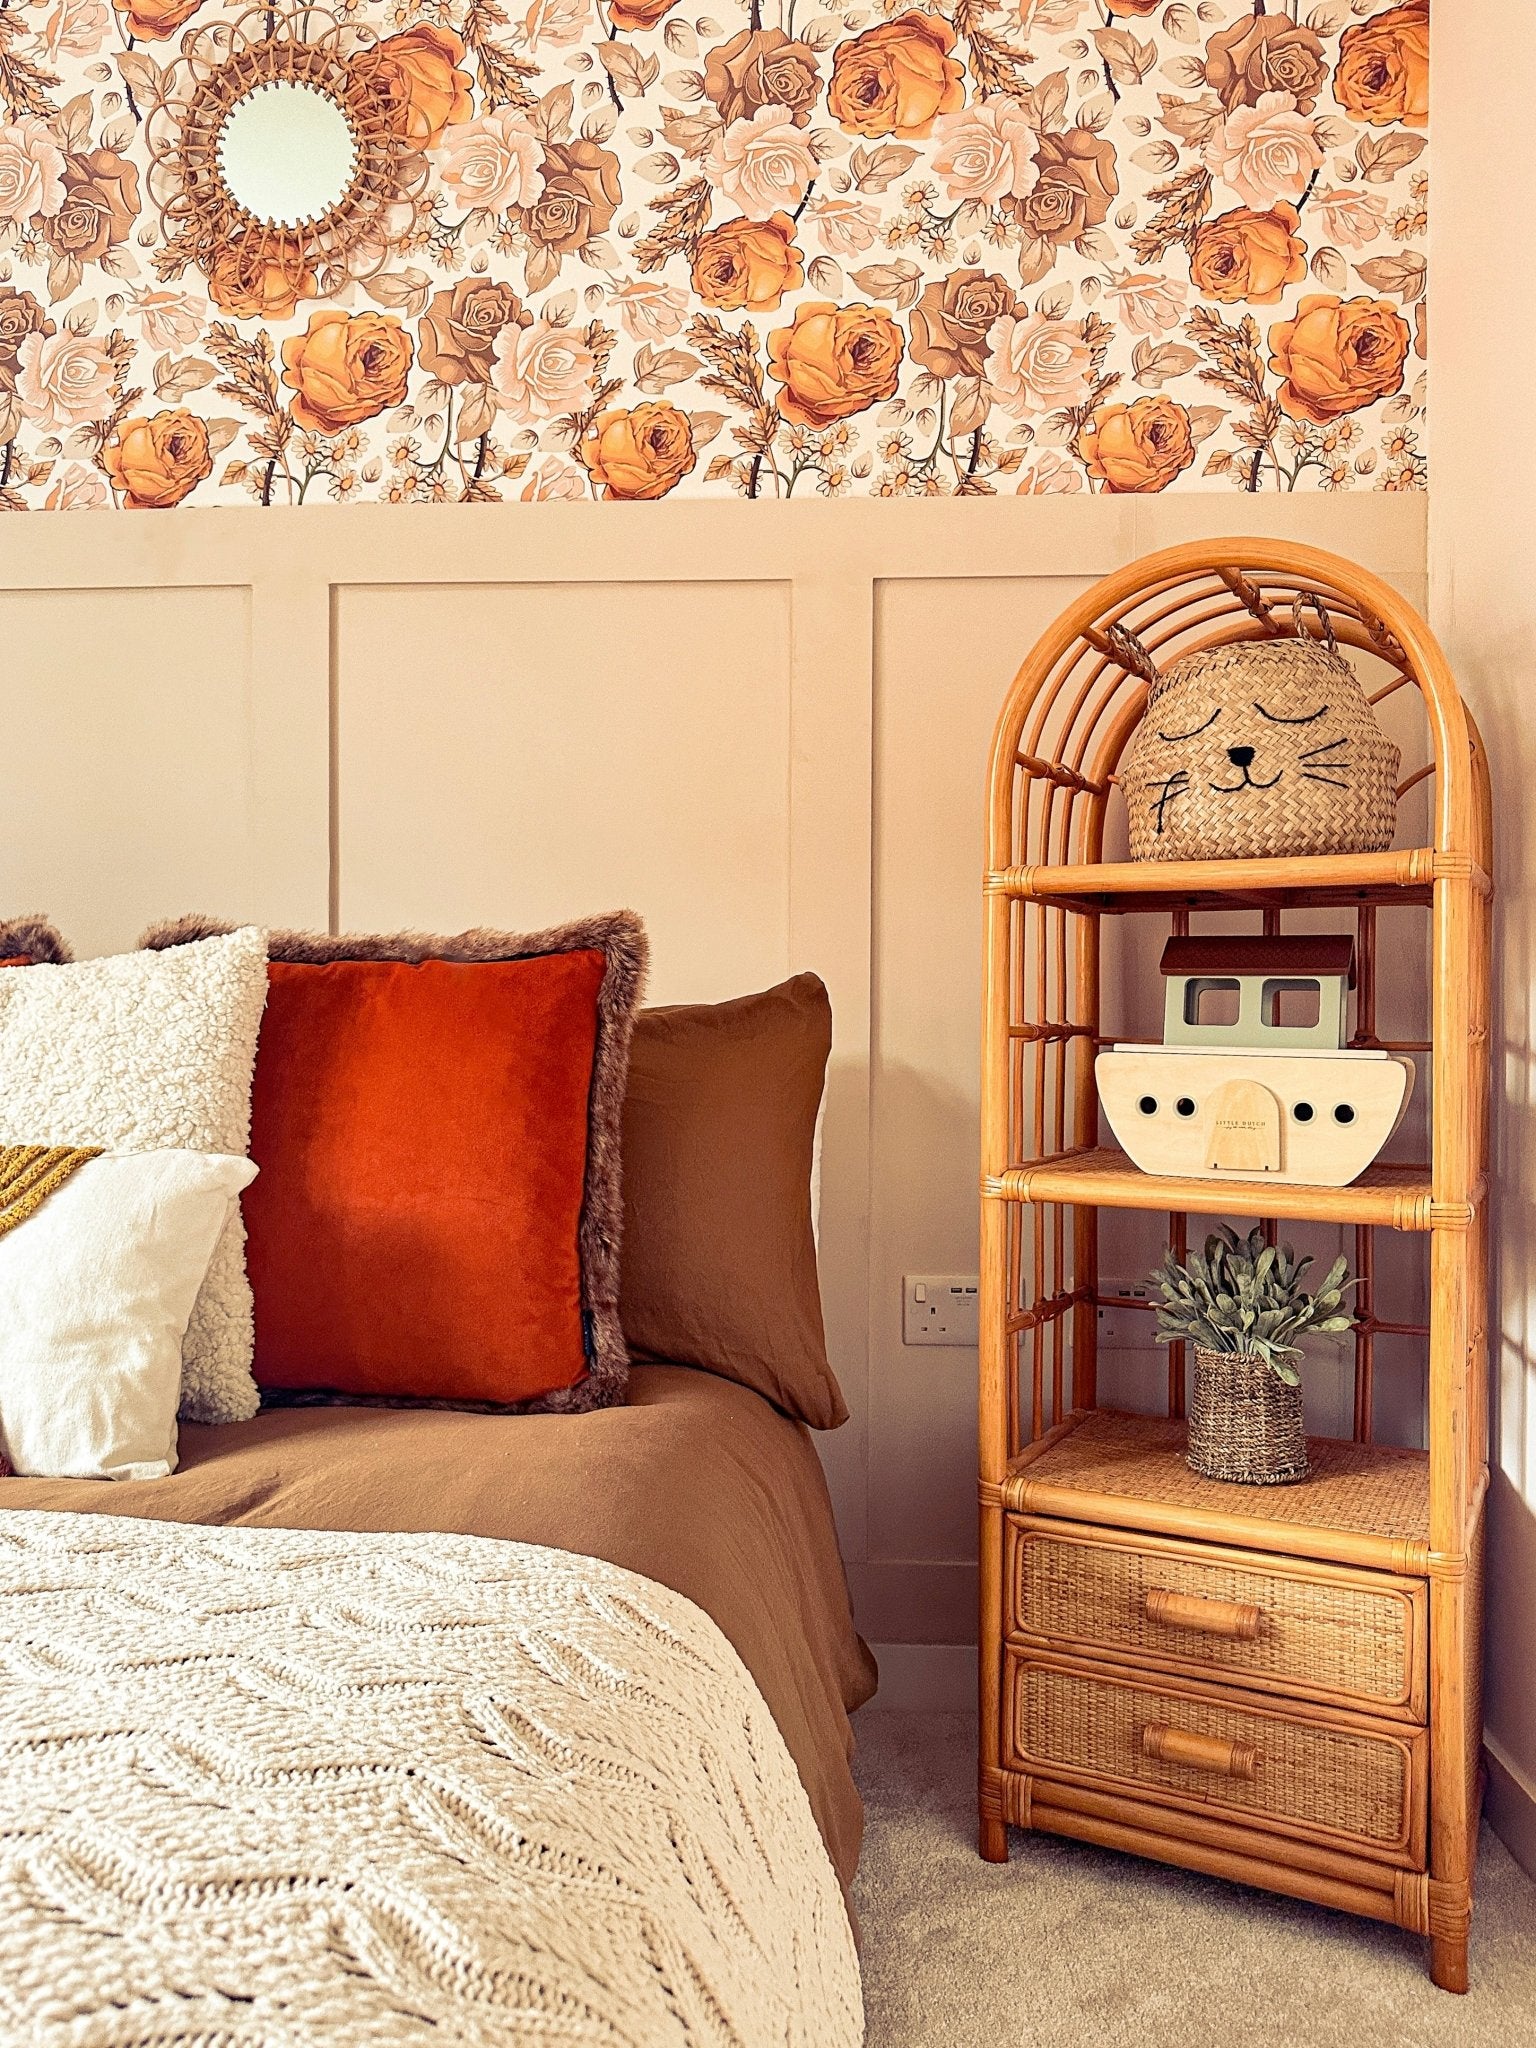 Bohemian Flower Wallpaper and tiki bamboo decorative shelf and bed in a child's room